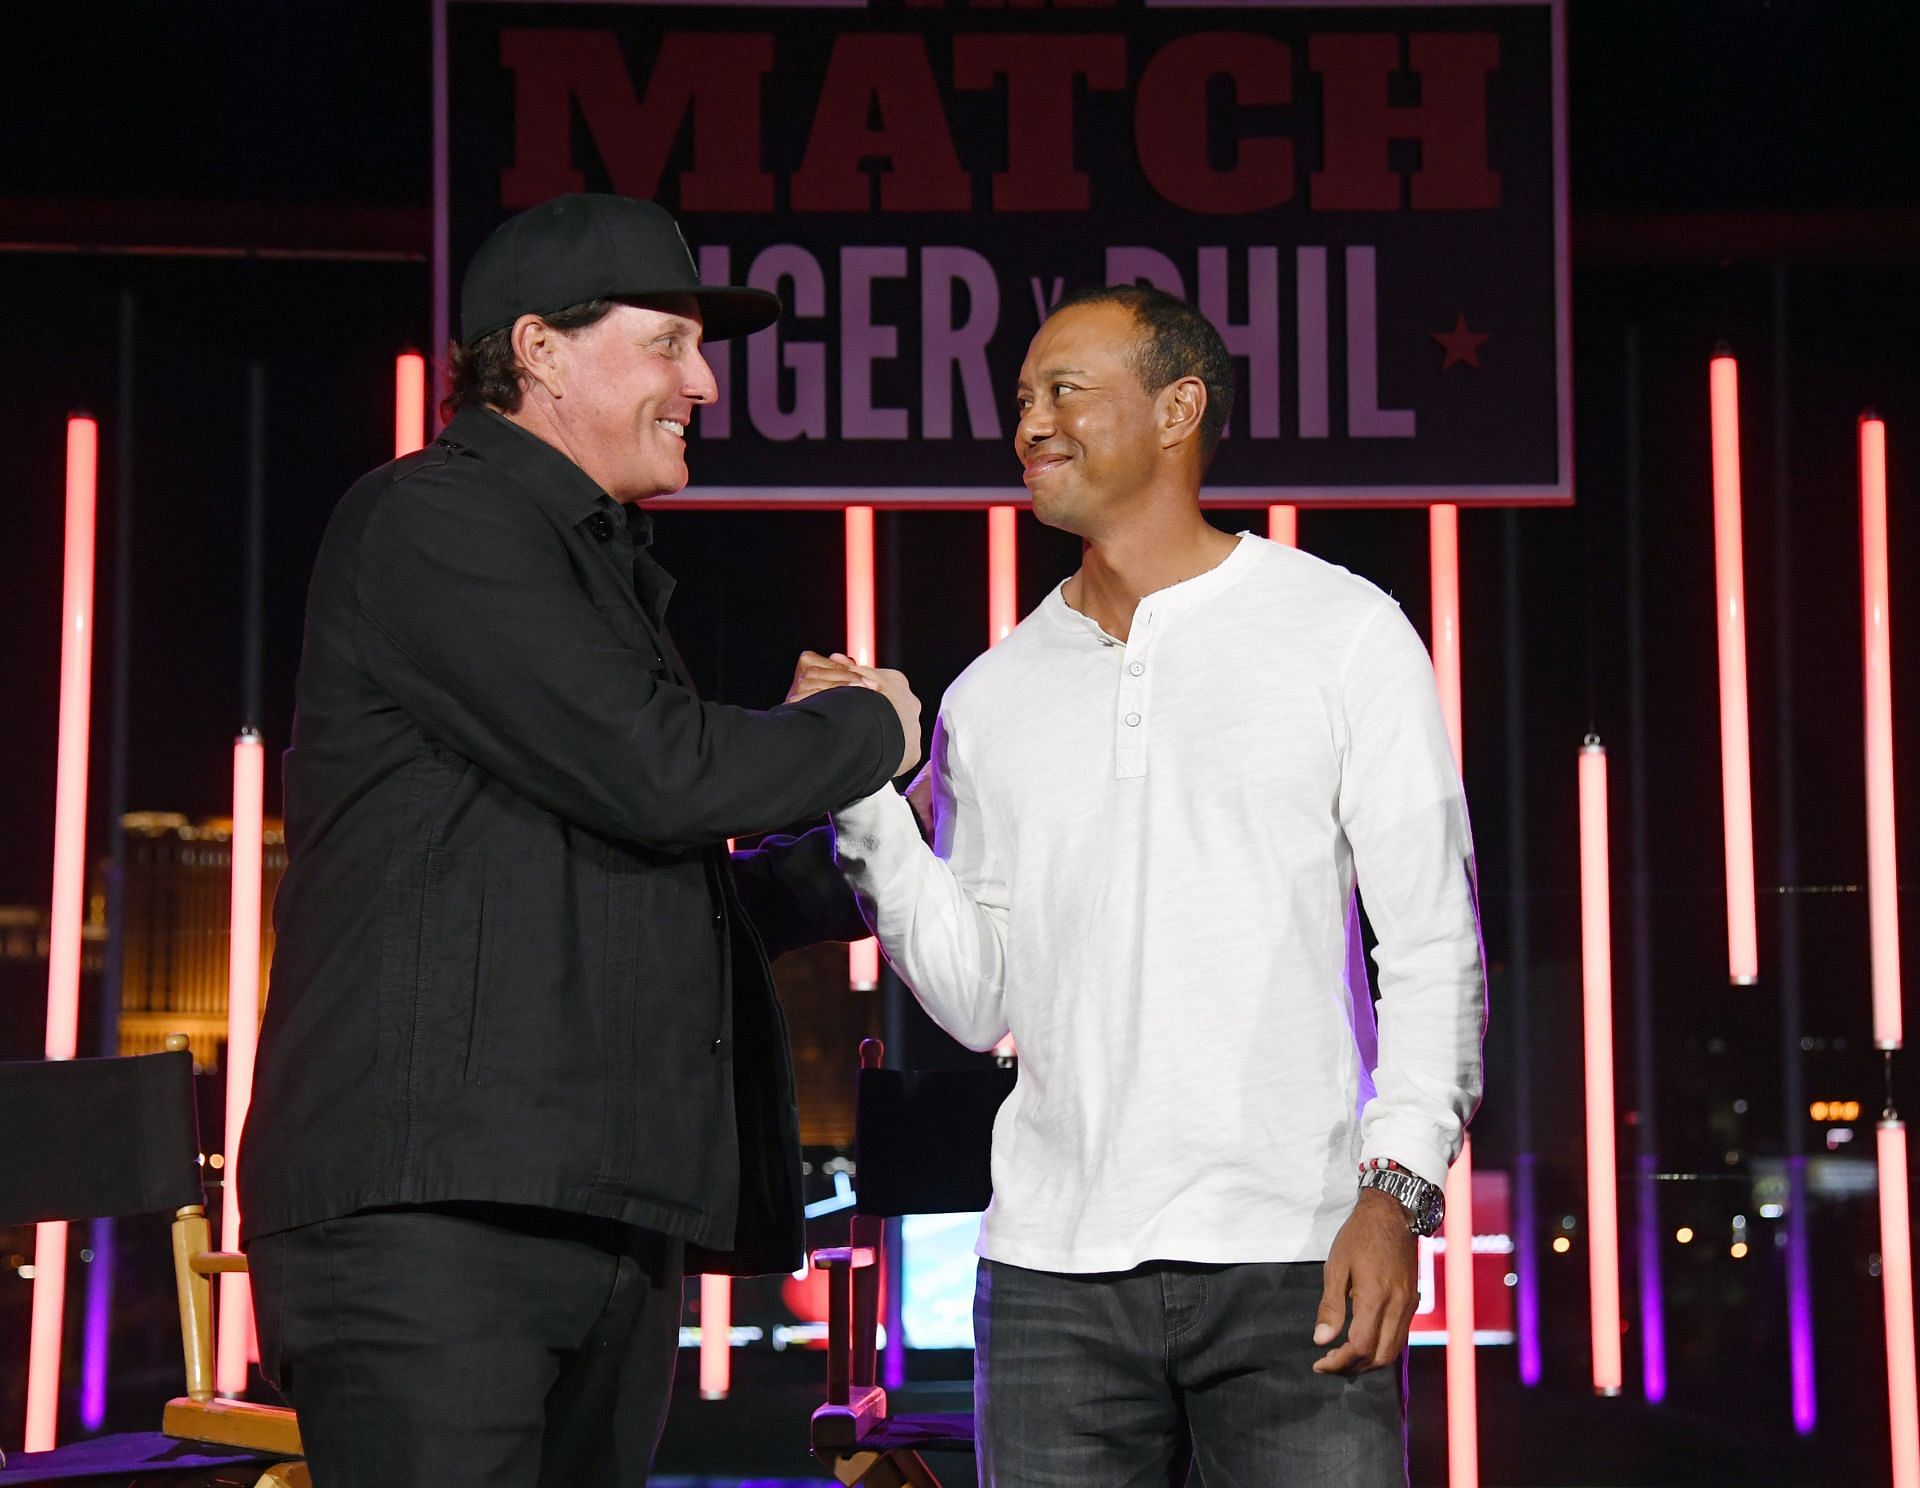 Tiger Woods and Phil Mickelson at The Match: Tiger vs Phil - VIP After Party (Image via Ethan Miller/Getty Images for The Match)